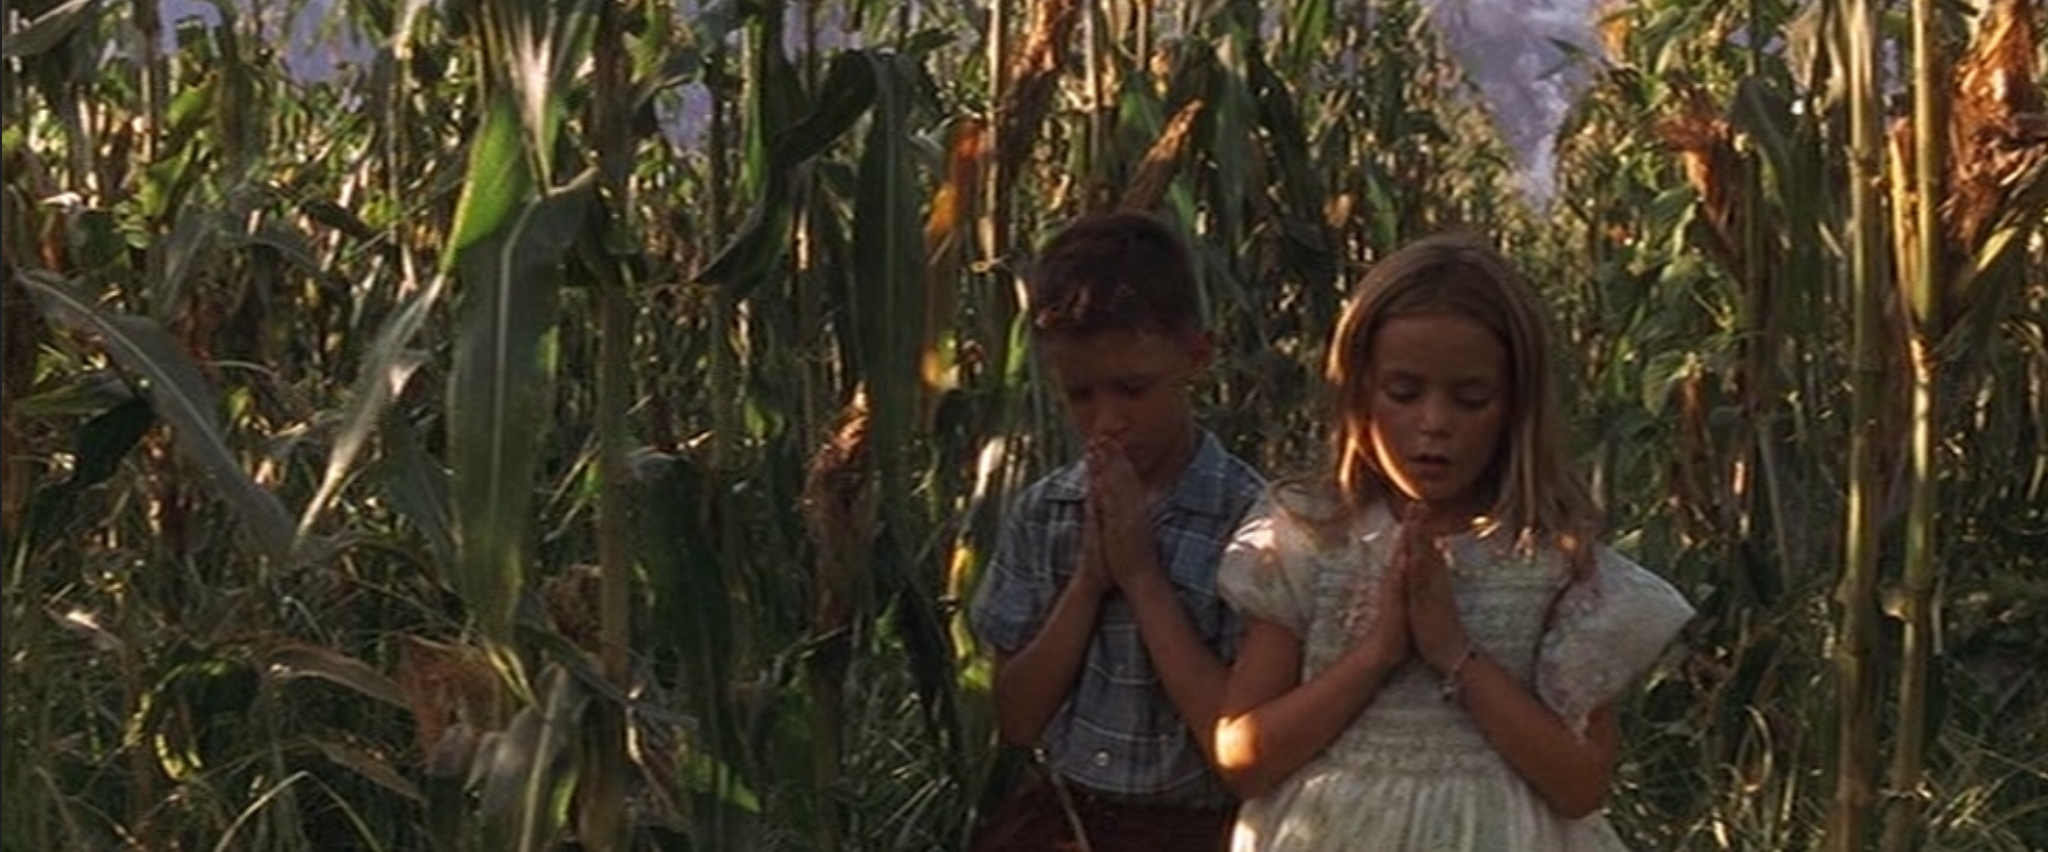 Hanna Hall and Michael Conner Humphreys in Forrest Gump (1994)